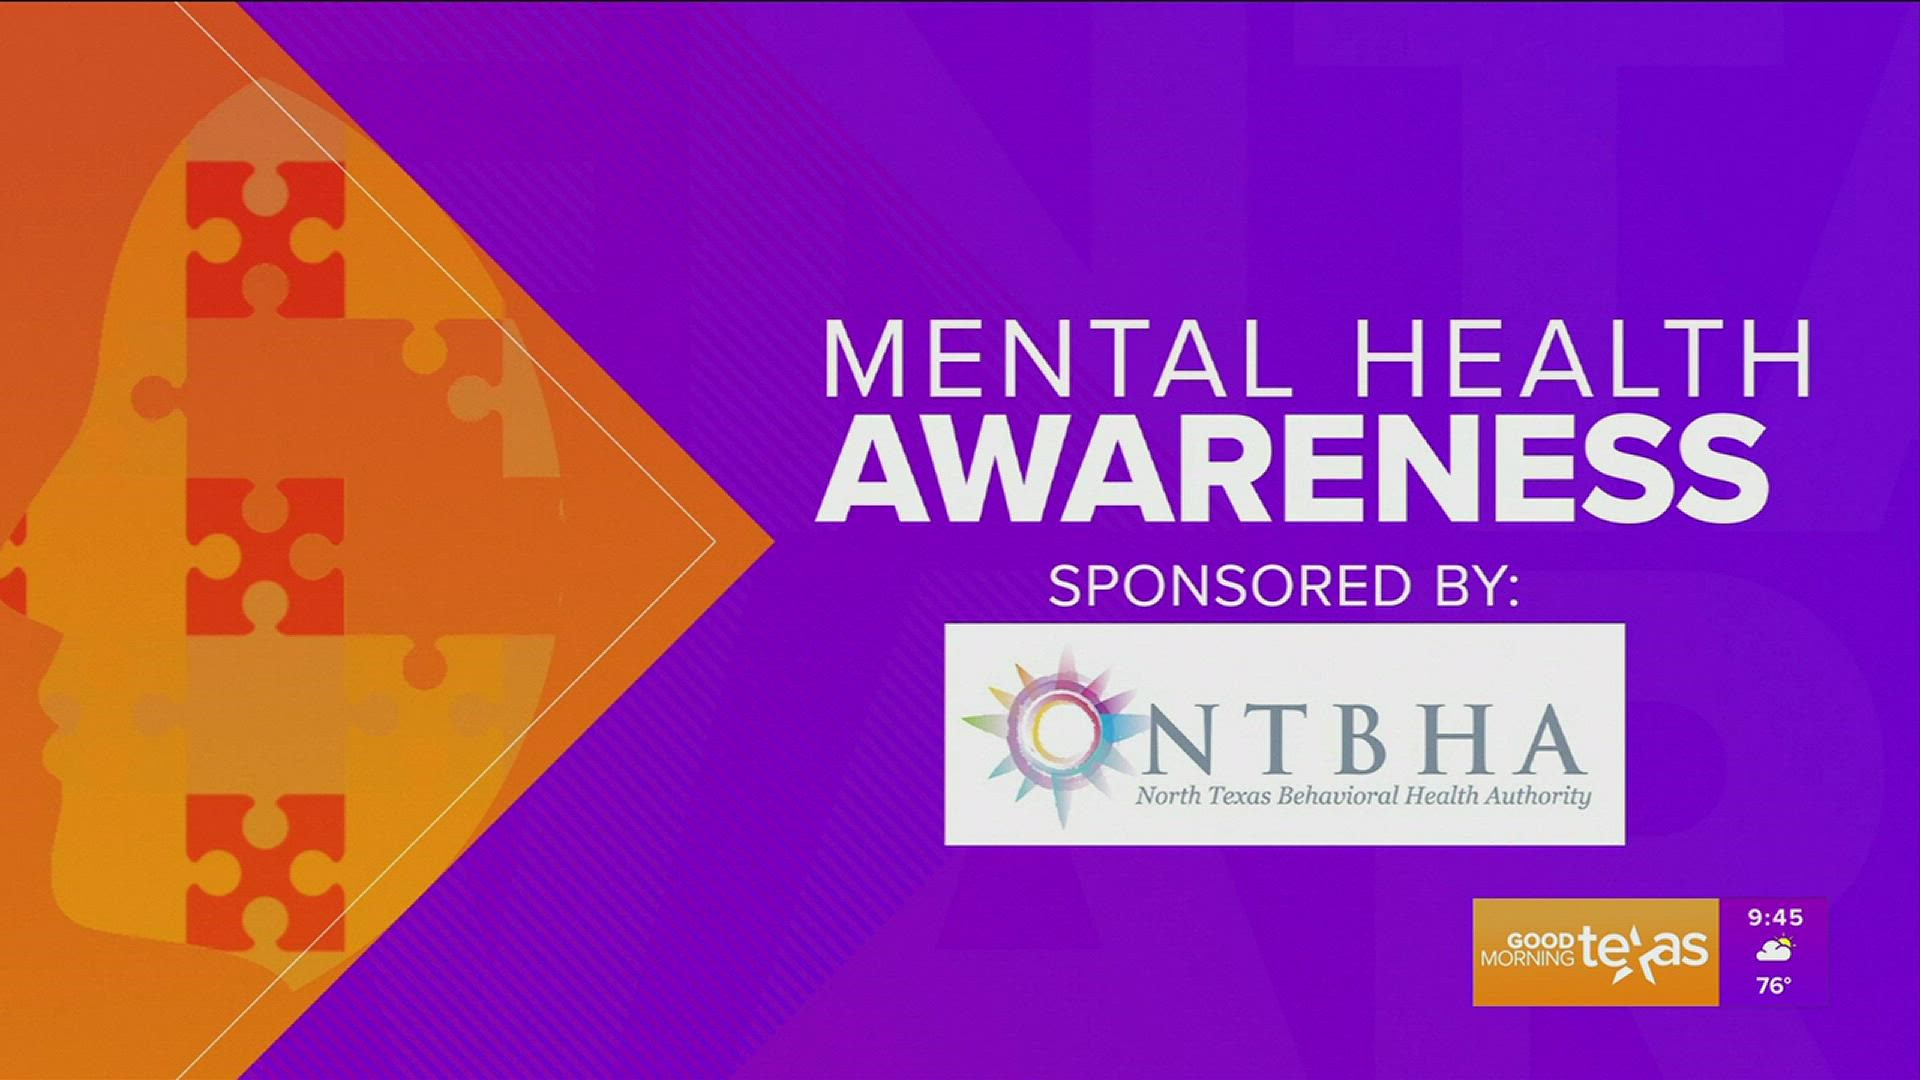 This segment is sponsored by North Texas Behavioral Health Authority